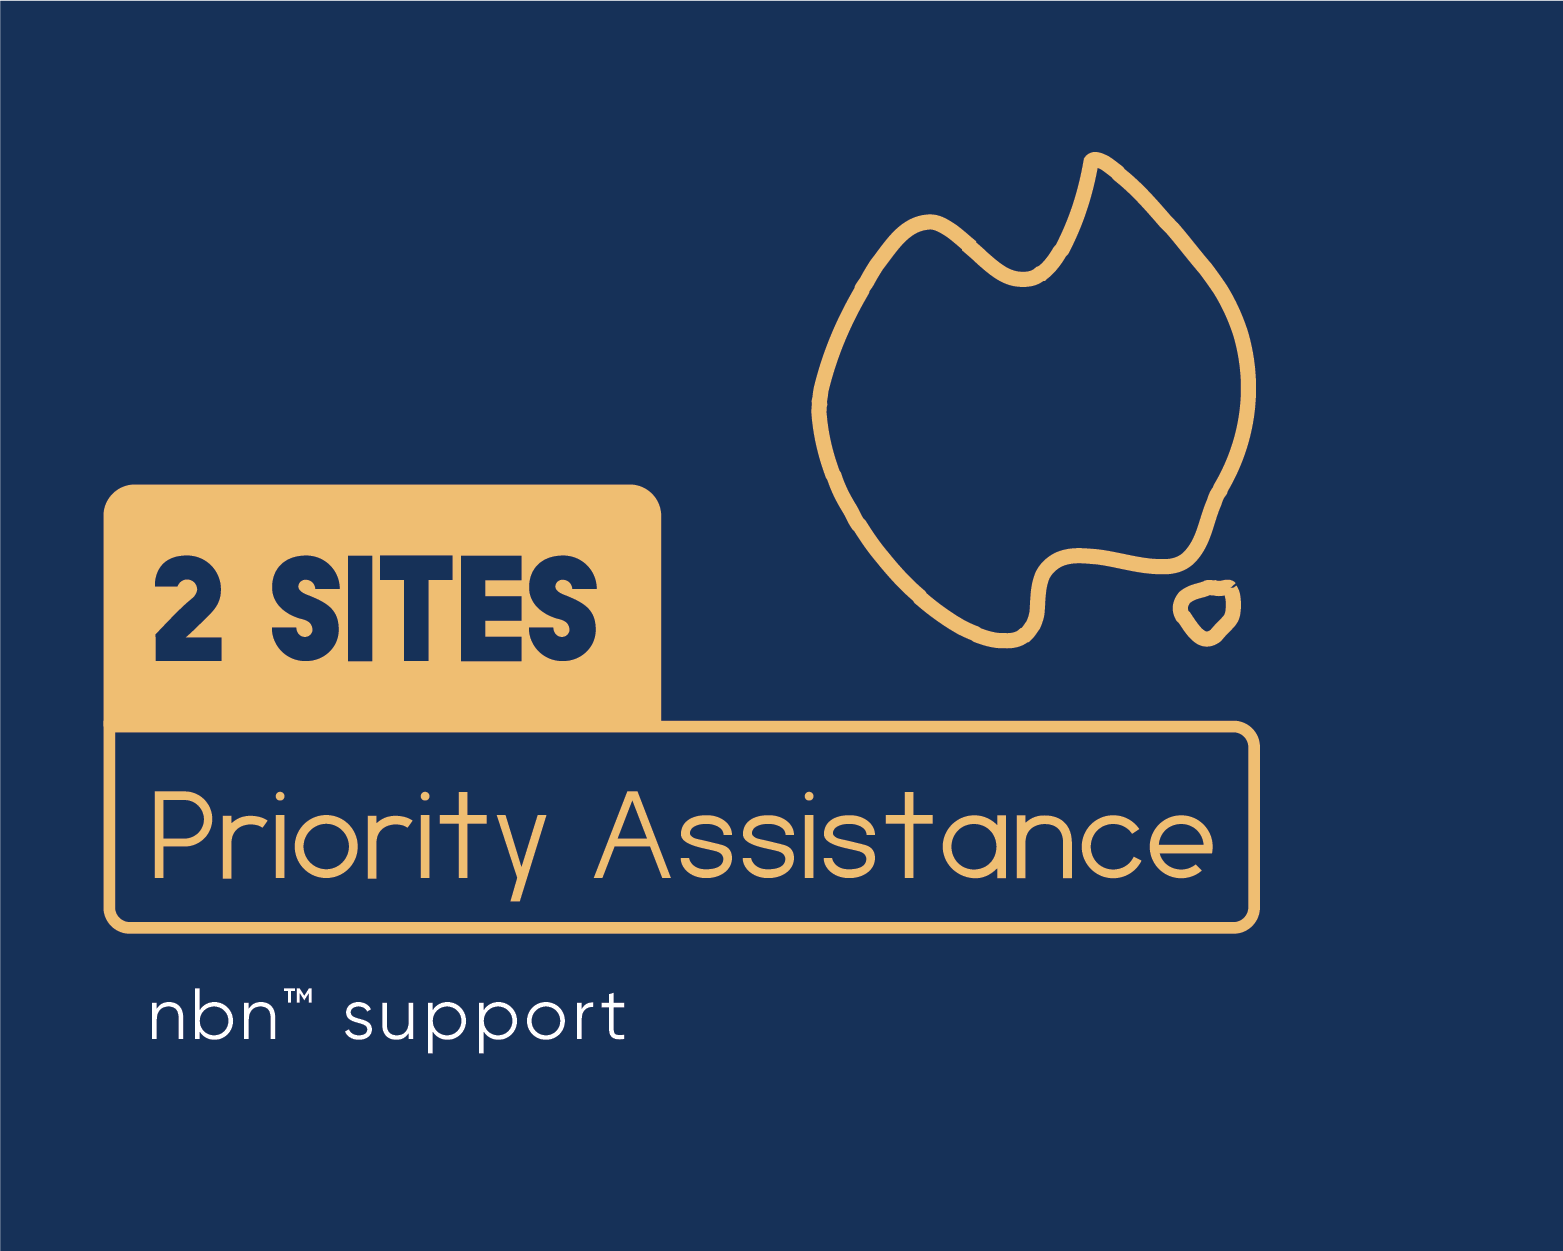 2 sites priority assistance